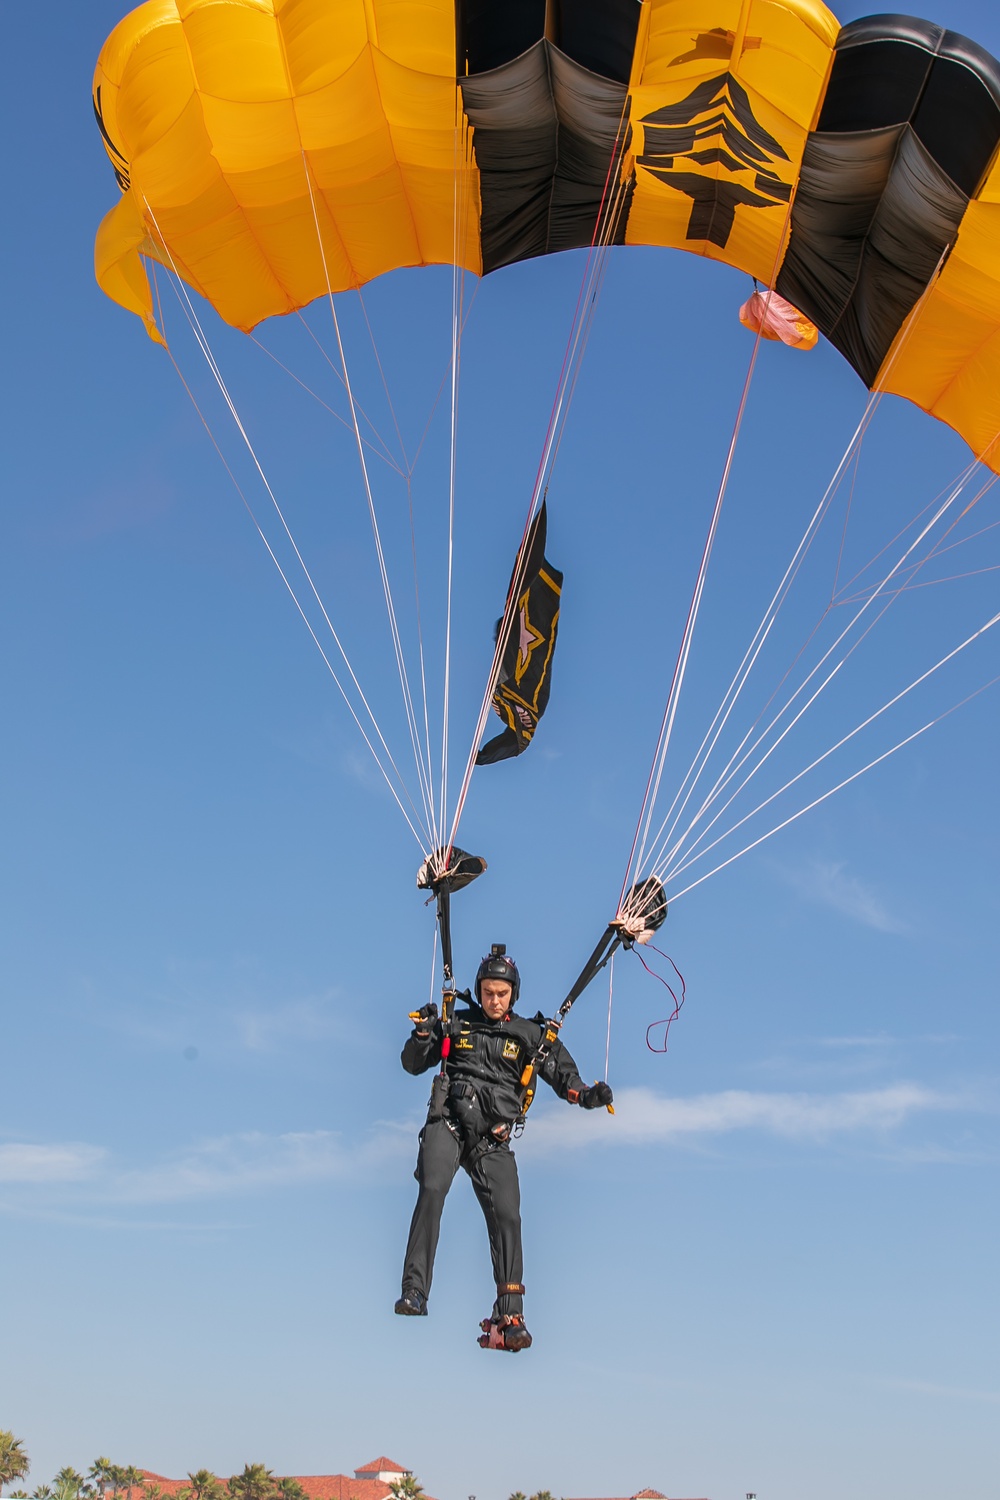 U.S. Army Parachute Team jumps at Great Pacific Airshow